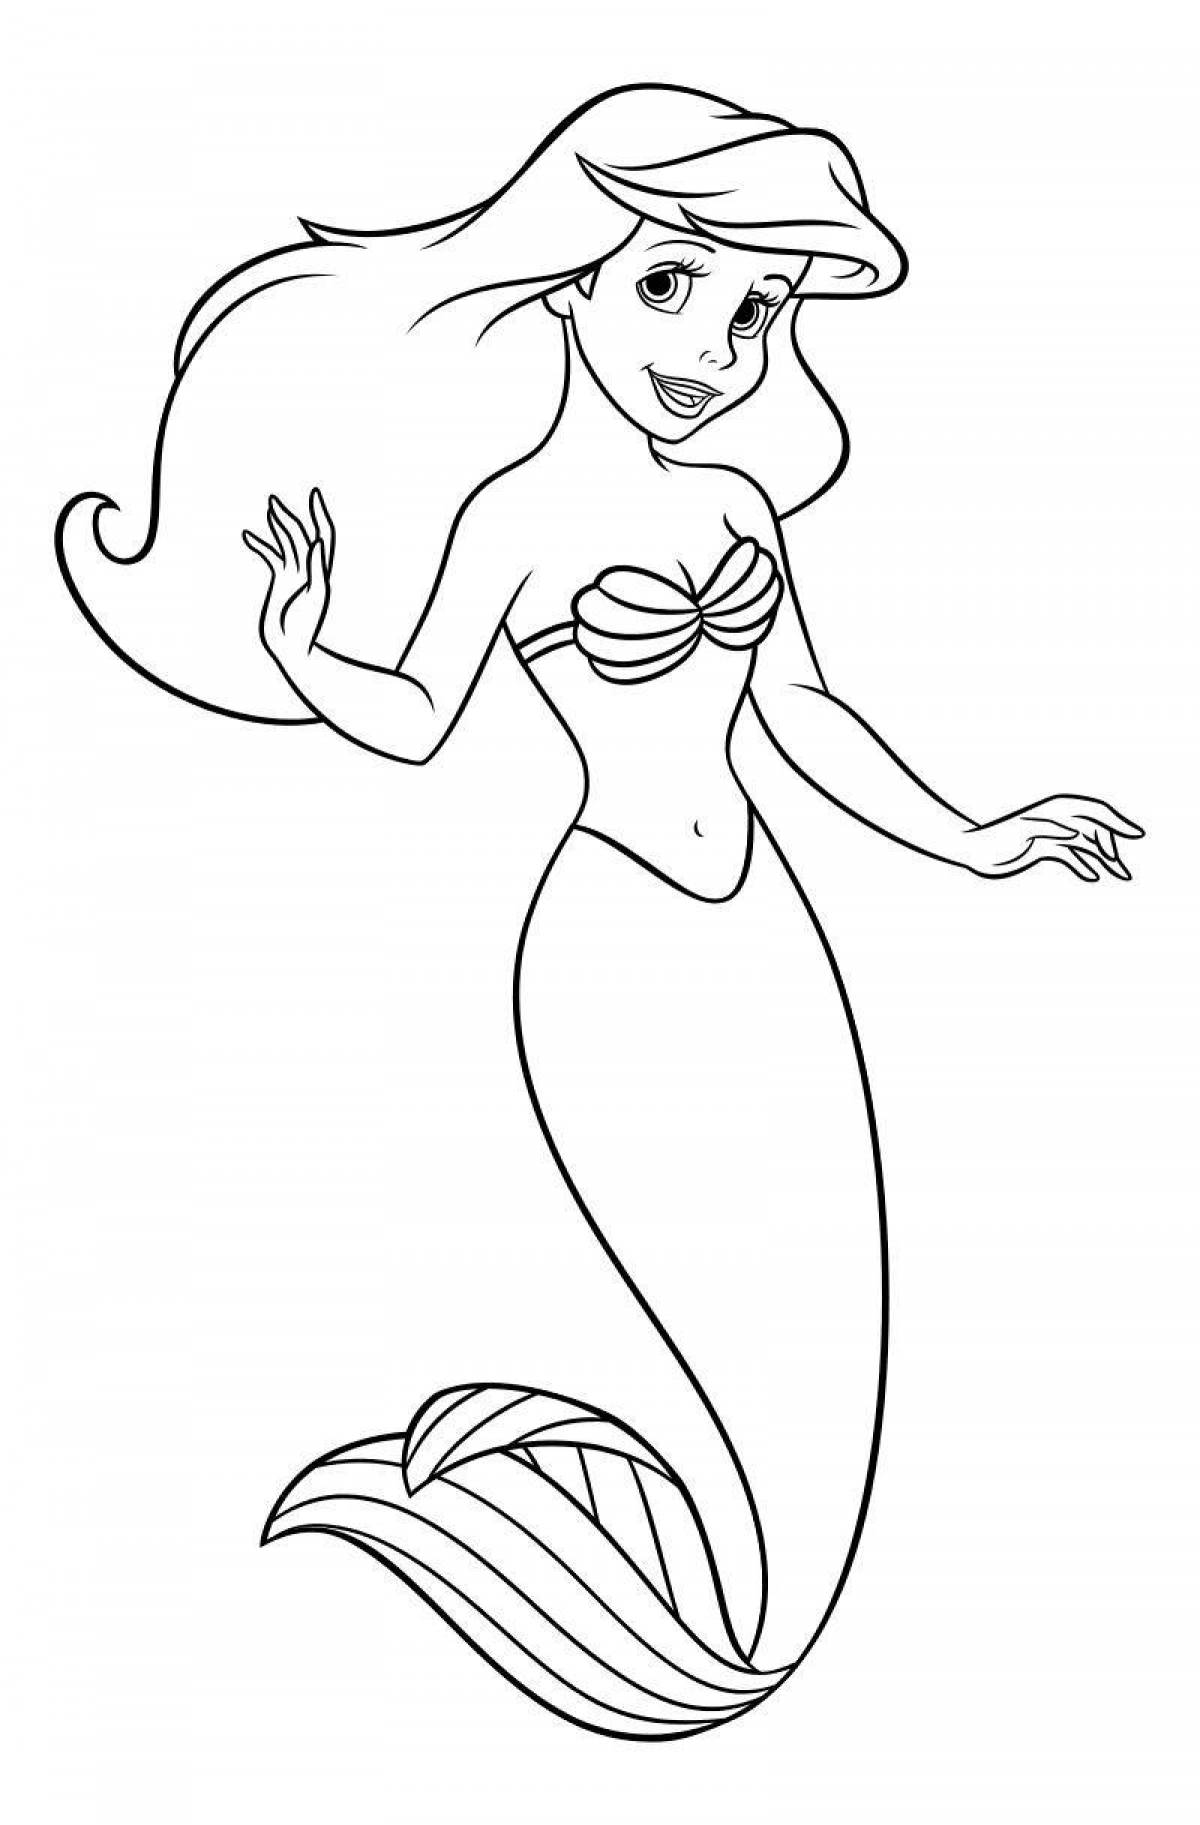 Violent coloring mermaid for children 3-4 years old